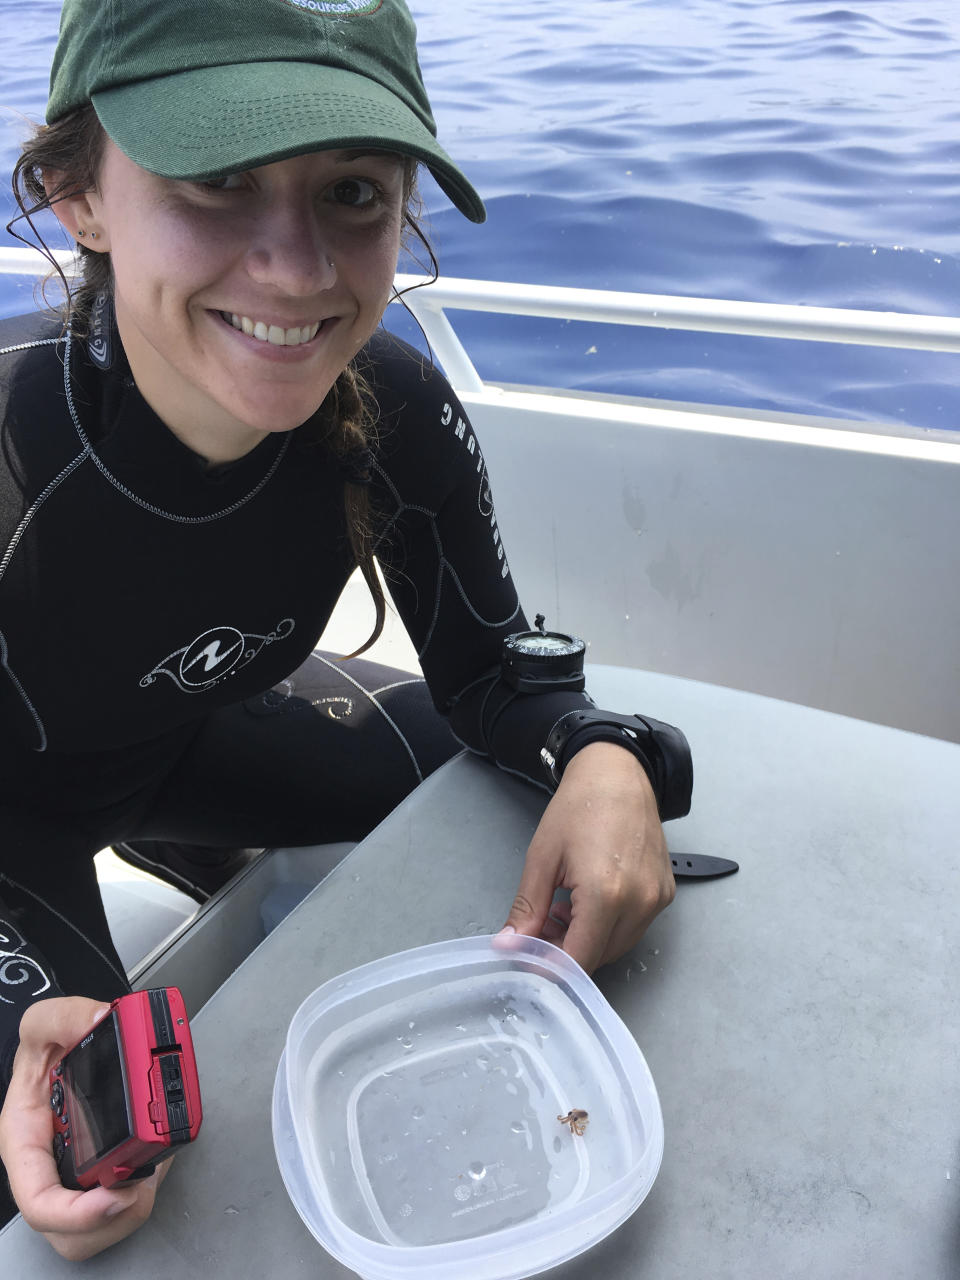 This Aug. 1, 2018 photo provided by the National Park Service shows intern Ashley Pugh posing with a baby octopus inside a plastic container at Kaloko-Honokohau National Historical Park in waters off Kailua-Kona, Hawaii. Hawaii scientists found two tiny, baby octopuses floating on plastic trash they were cleaning up while monitoring coral reefs. (Sallie Beavers/National Park Service via AP)